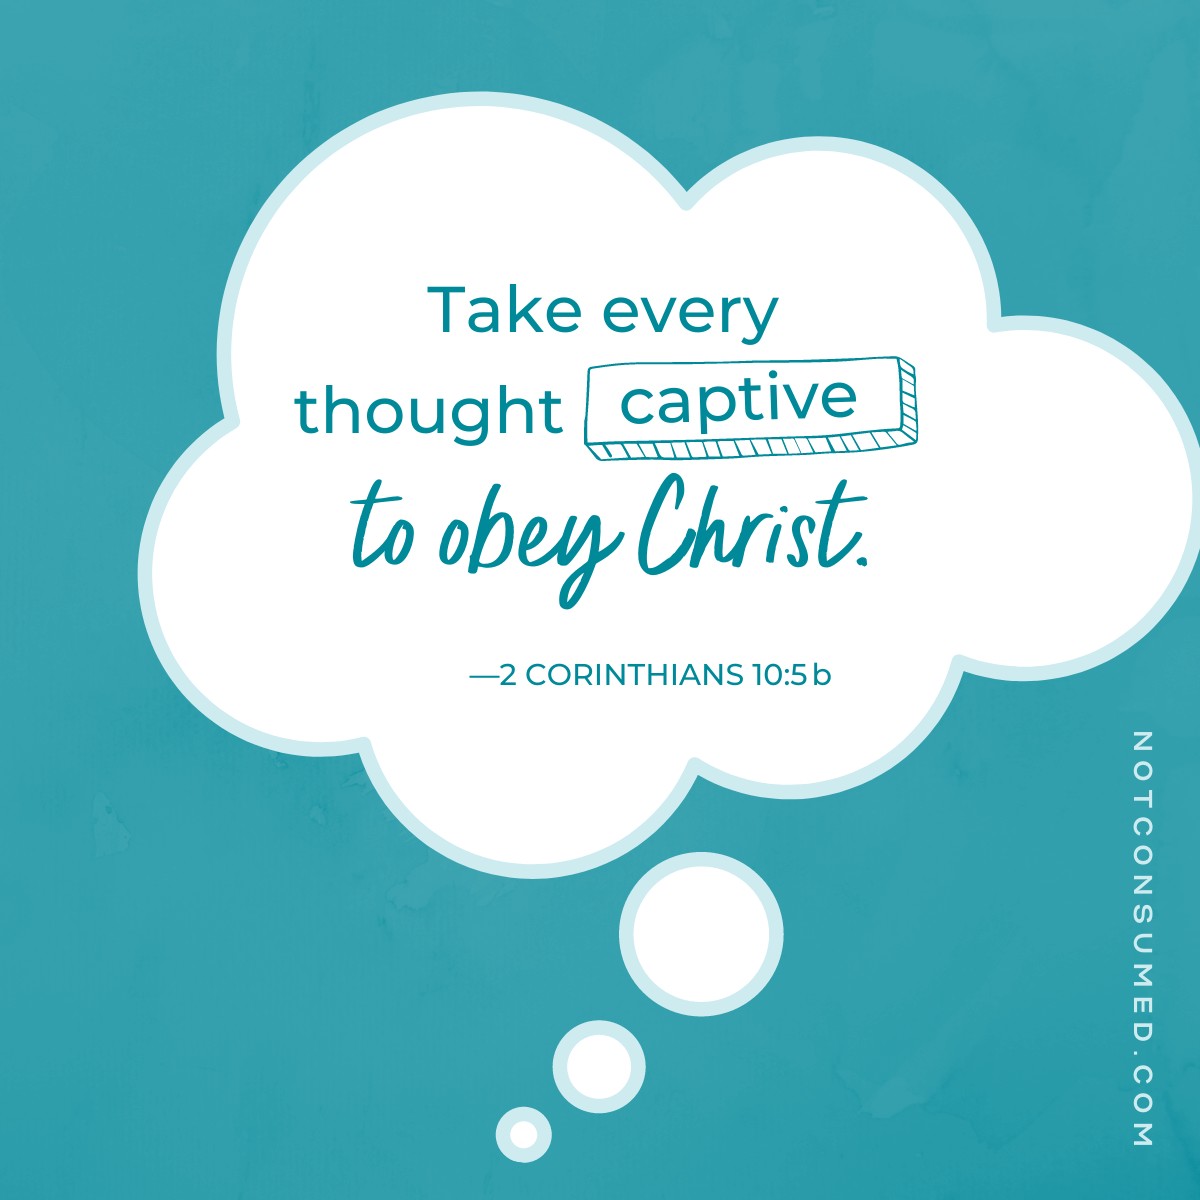 Take every thought captive quote